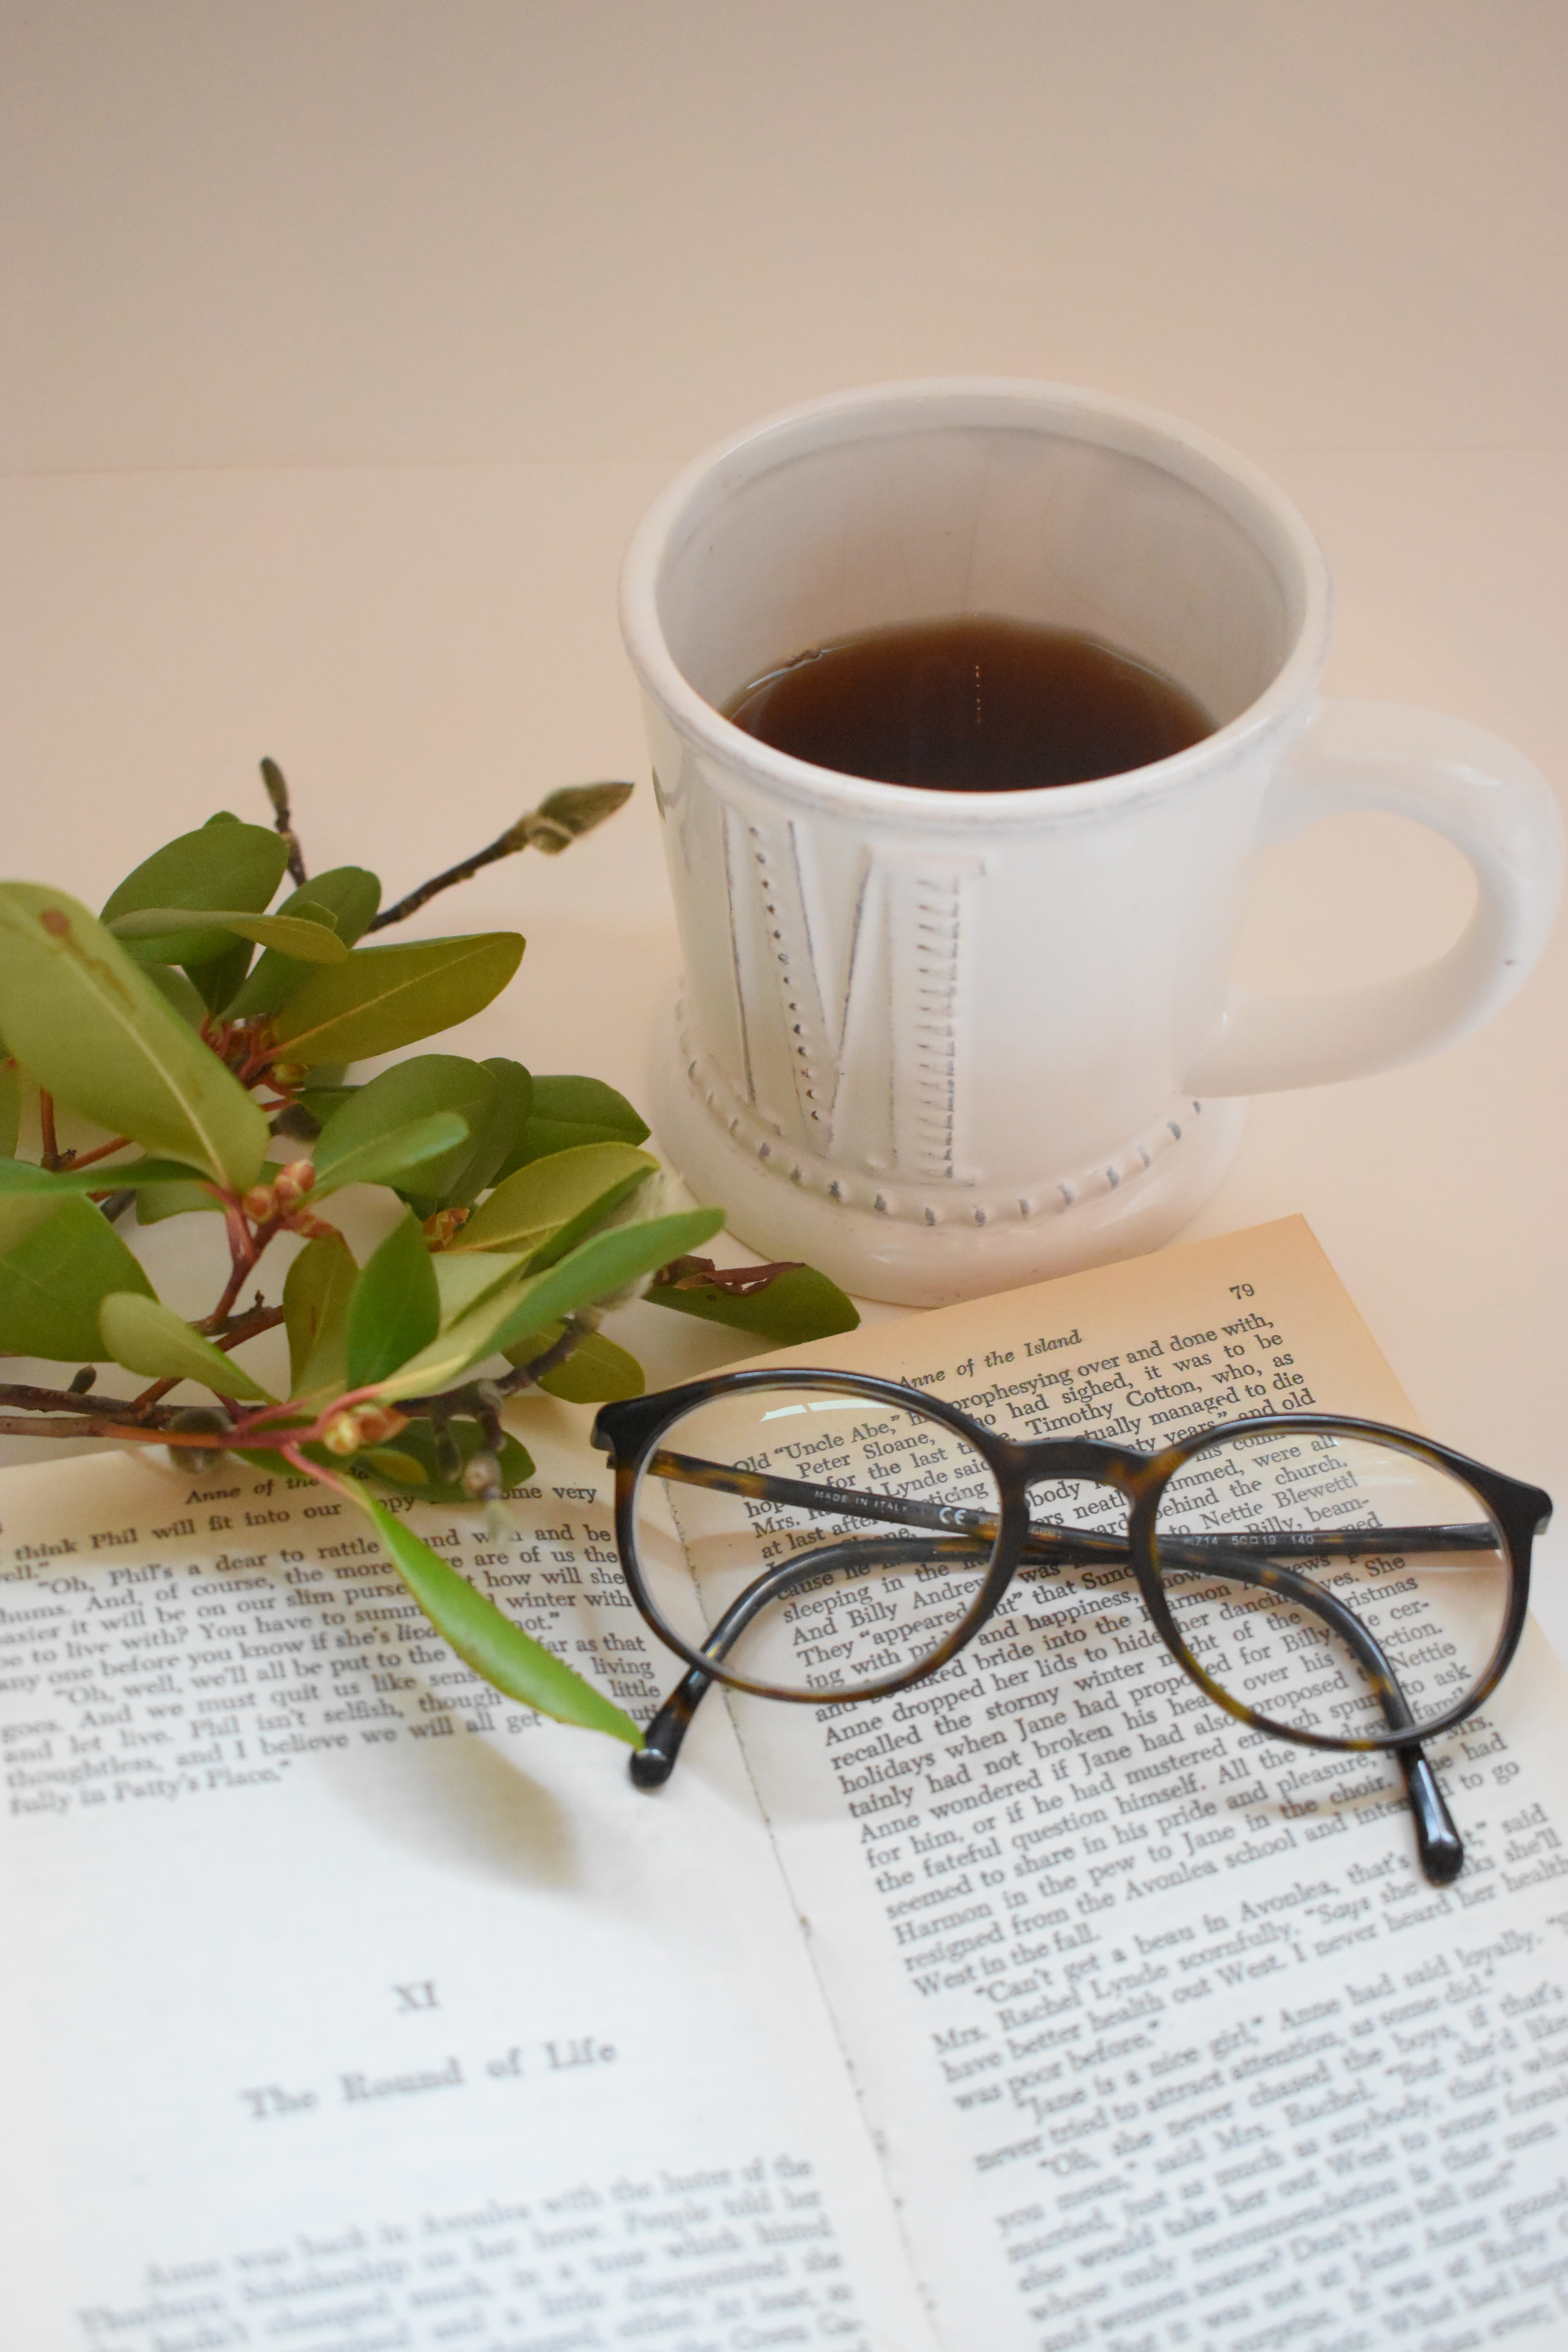 Windows Backgrounds spectacles, miscellanea, miscellaneous, cup, book, glasses